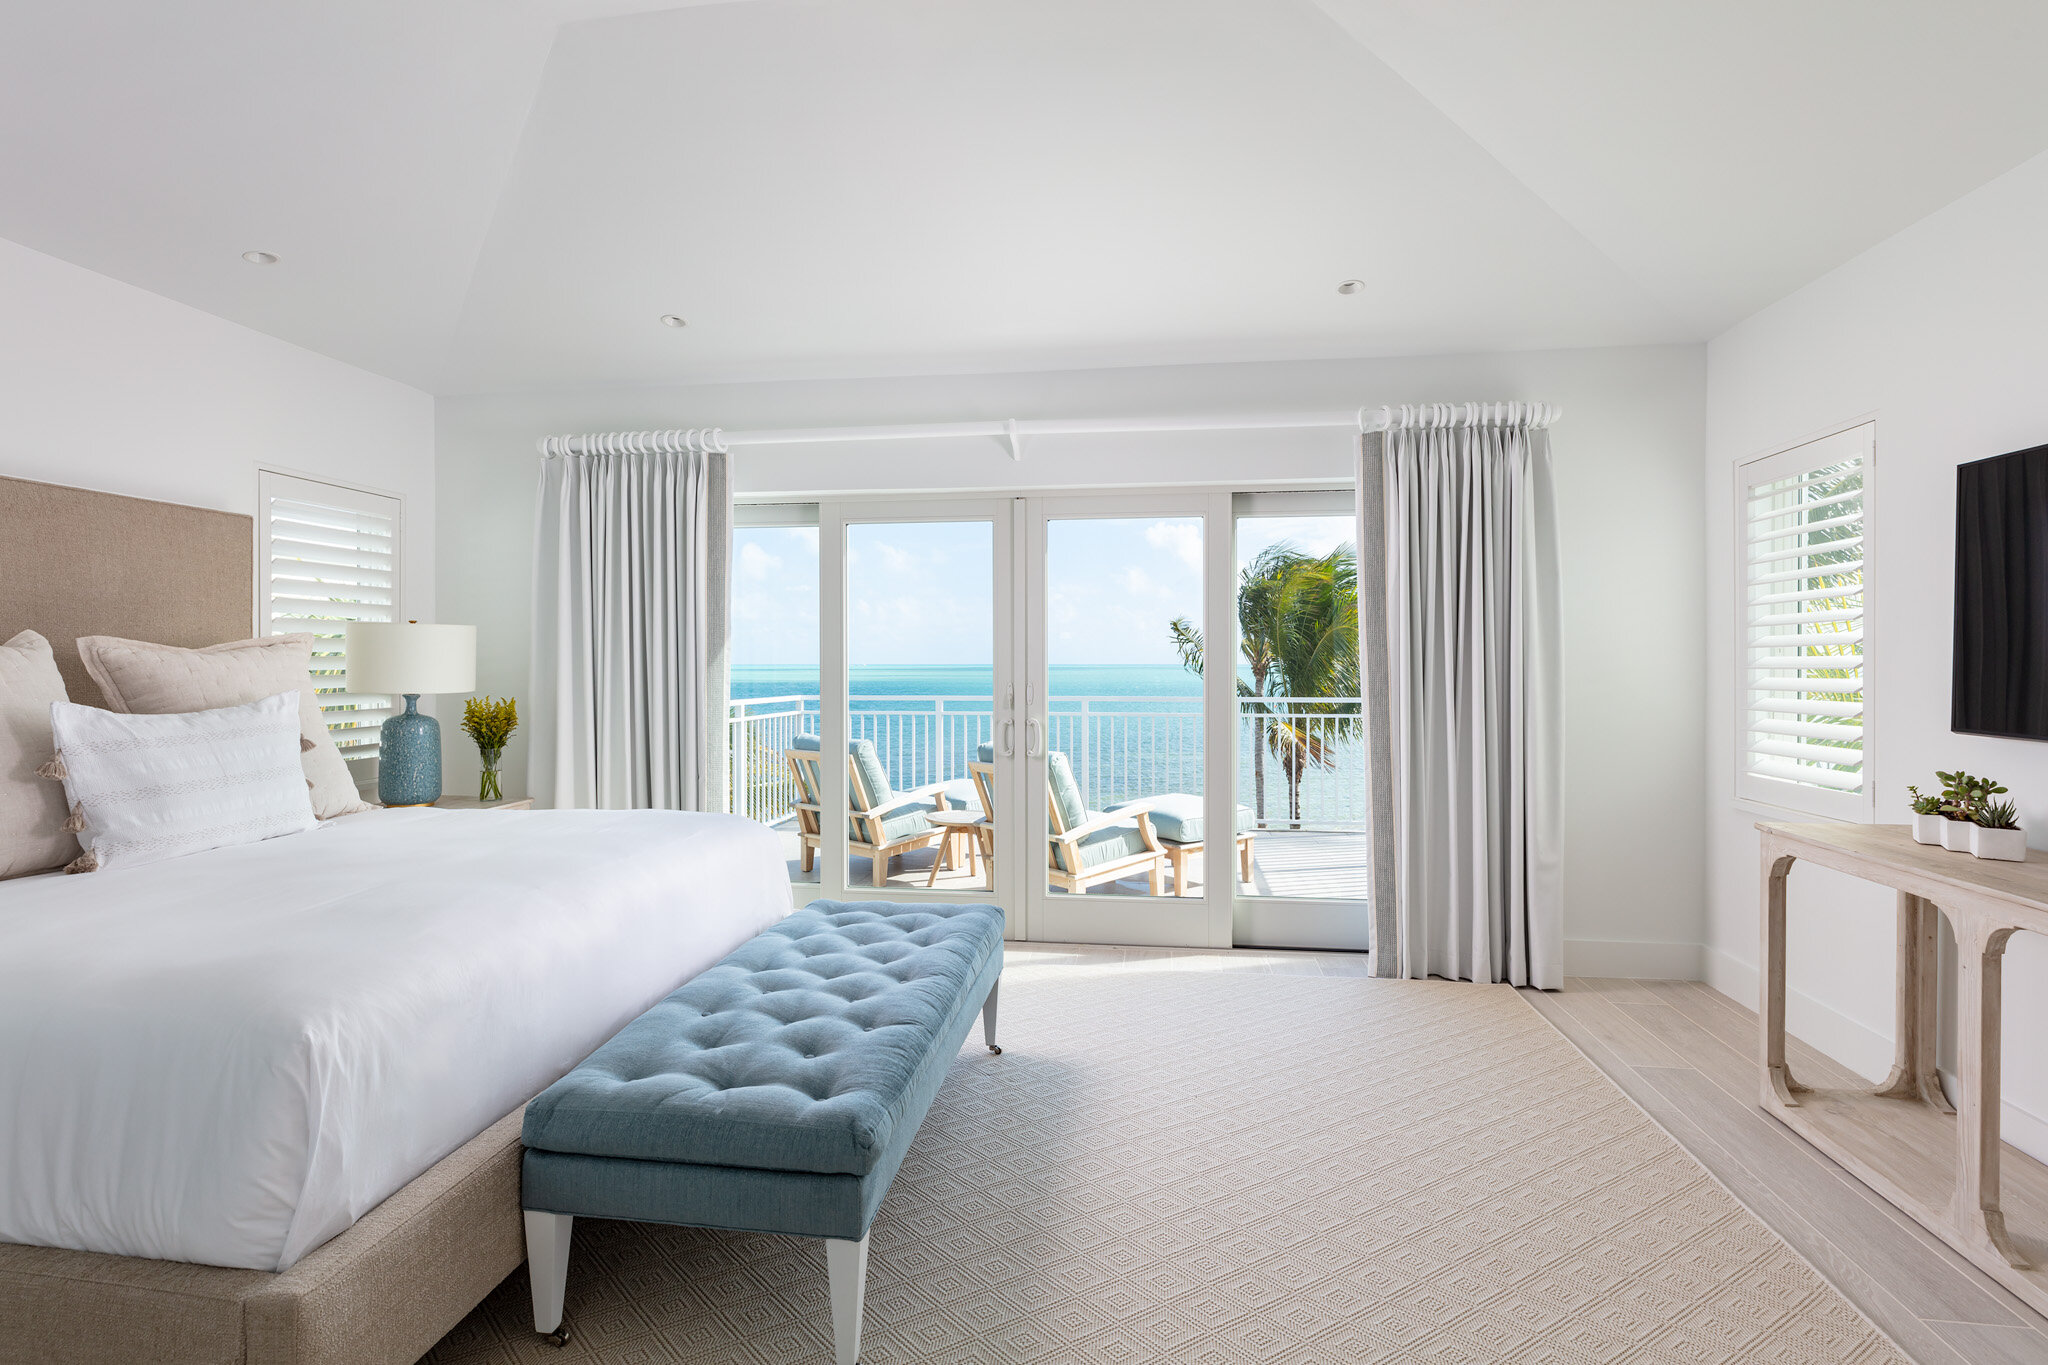  Master bedroom suite with large king bed and sliding door access to balcony with ocean view on the second floor of an Islands waterfront villa. 